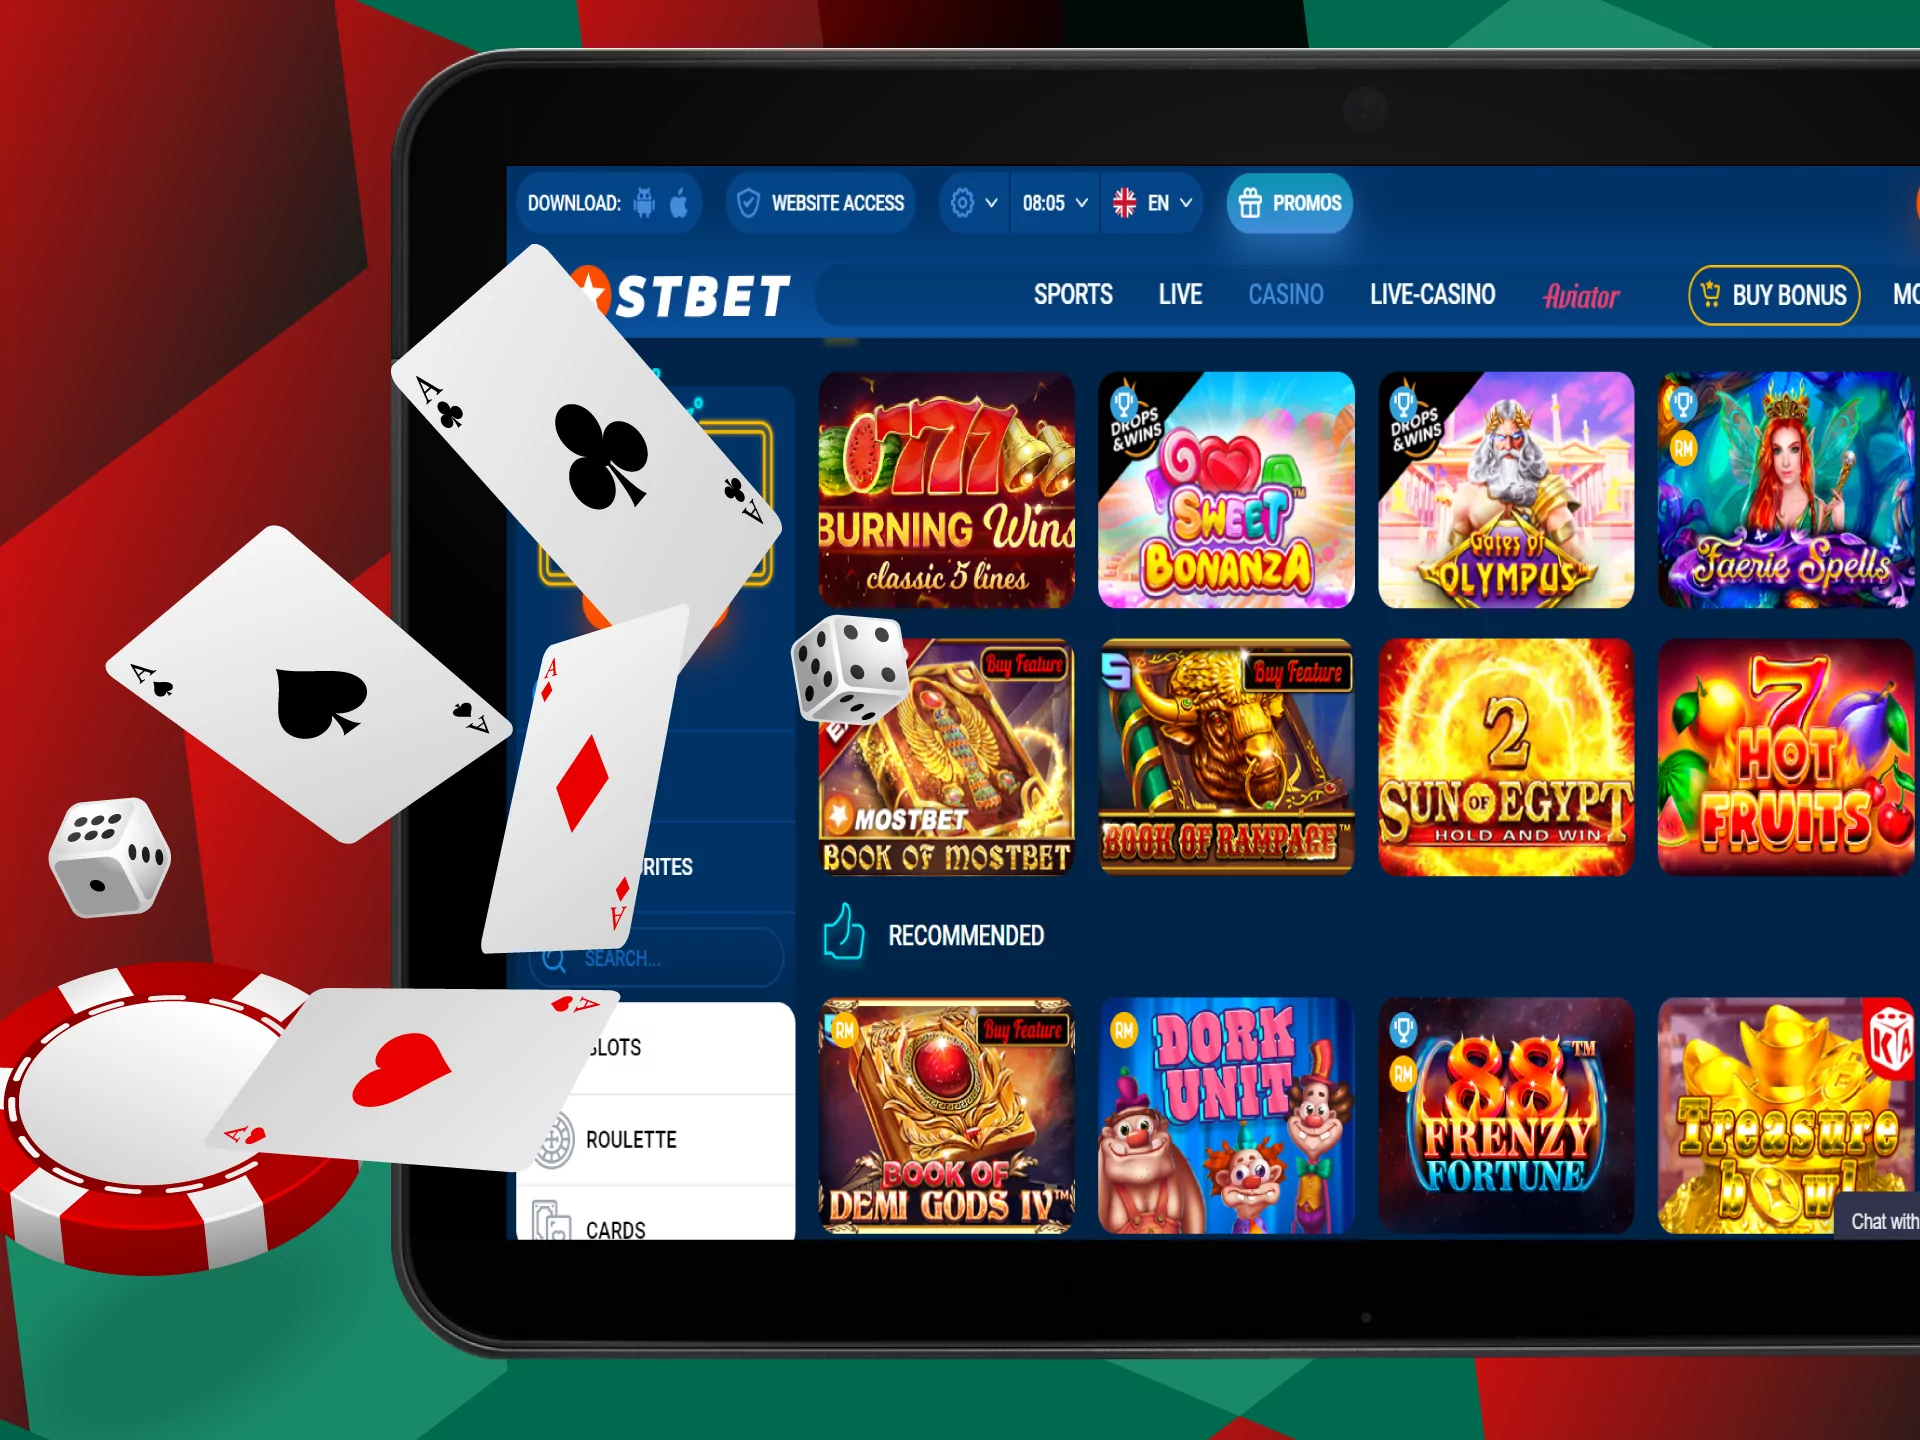 You will find all the casino games in the Mostbet application.